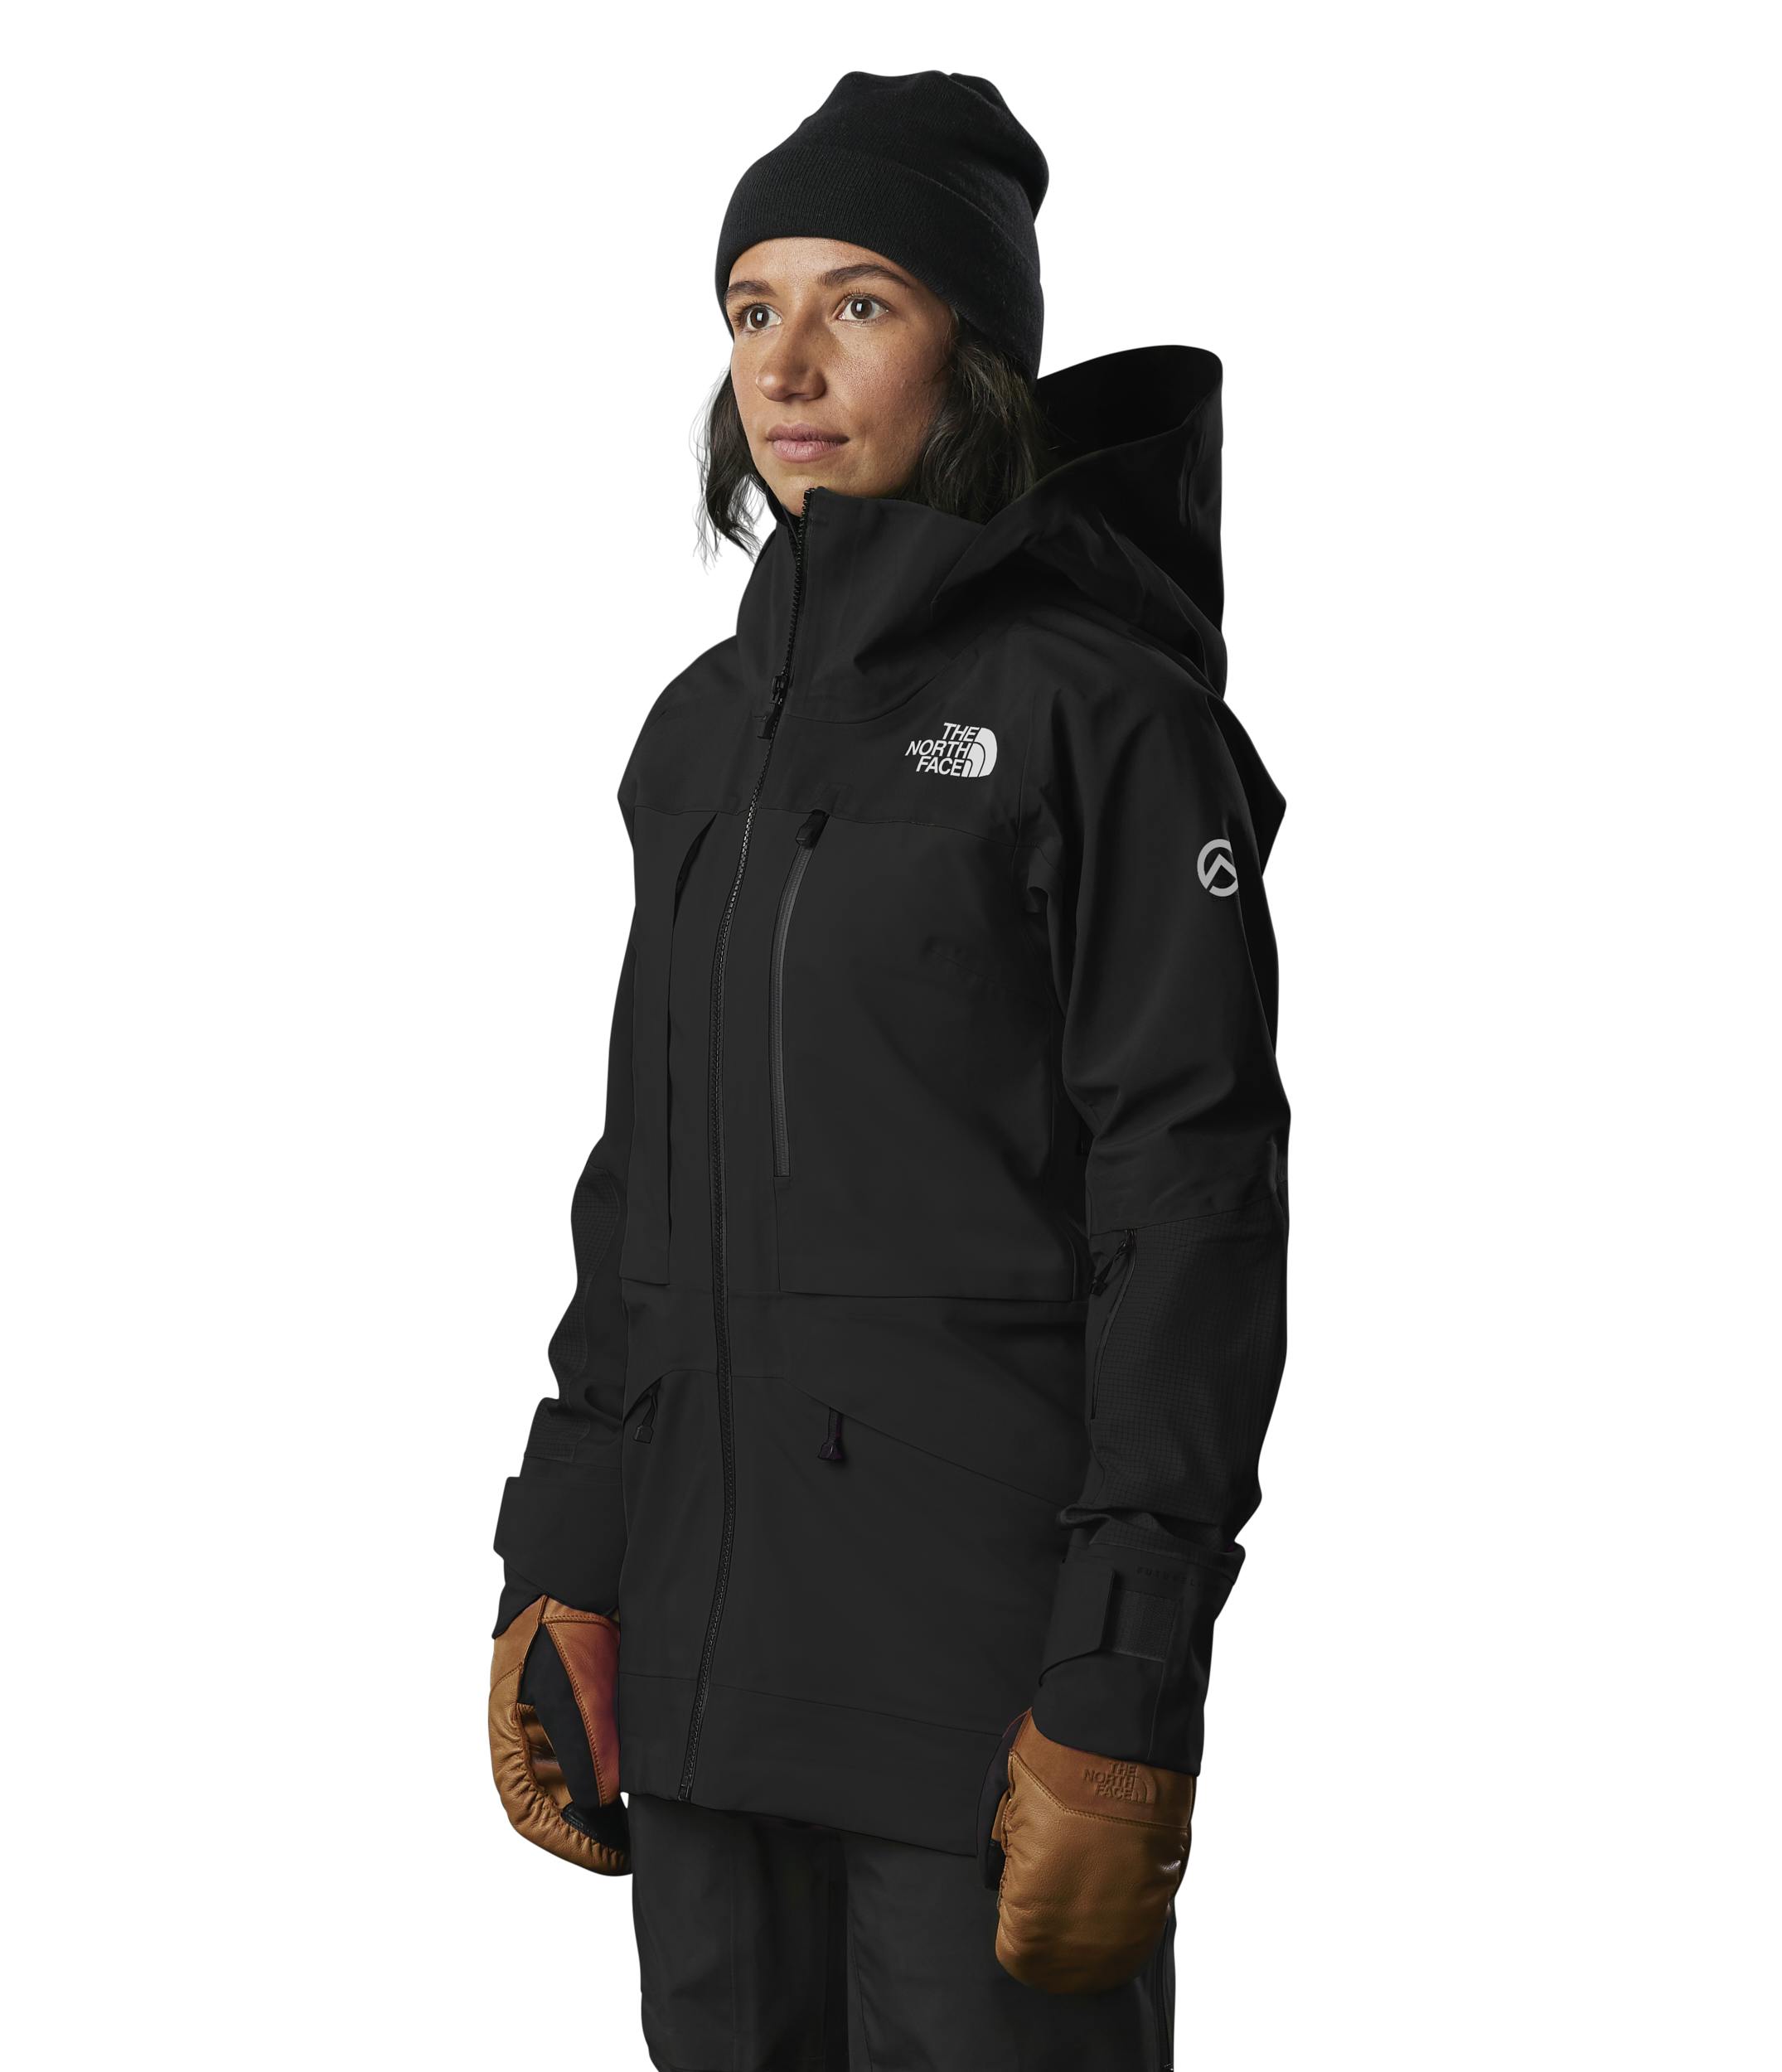 Not sure about North Face Summit Verbier Jacket - Keep or return